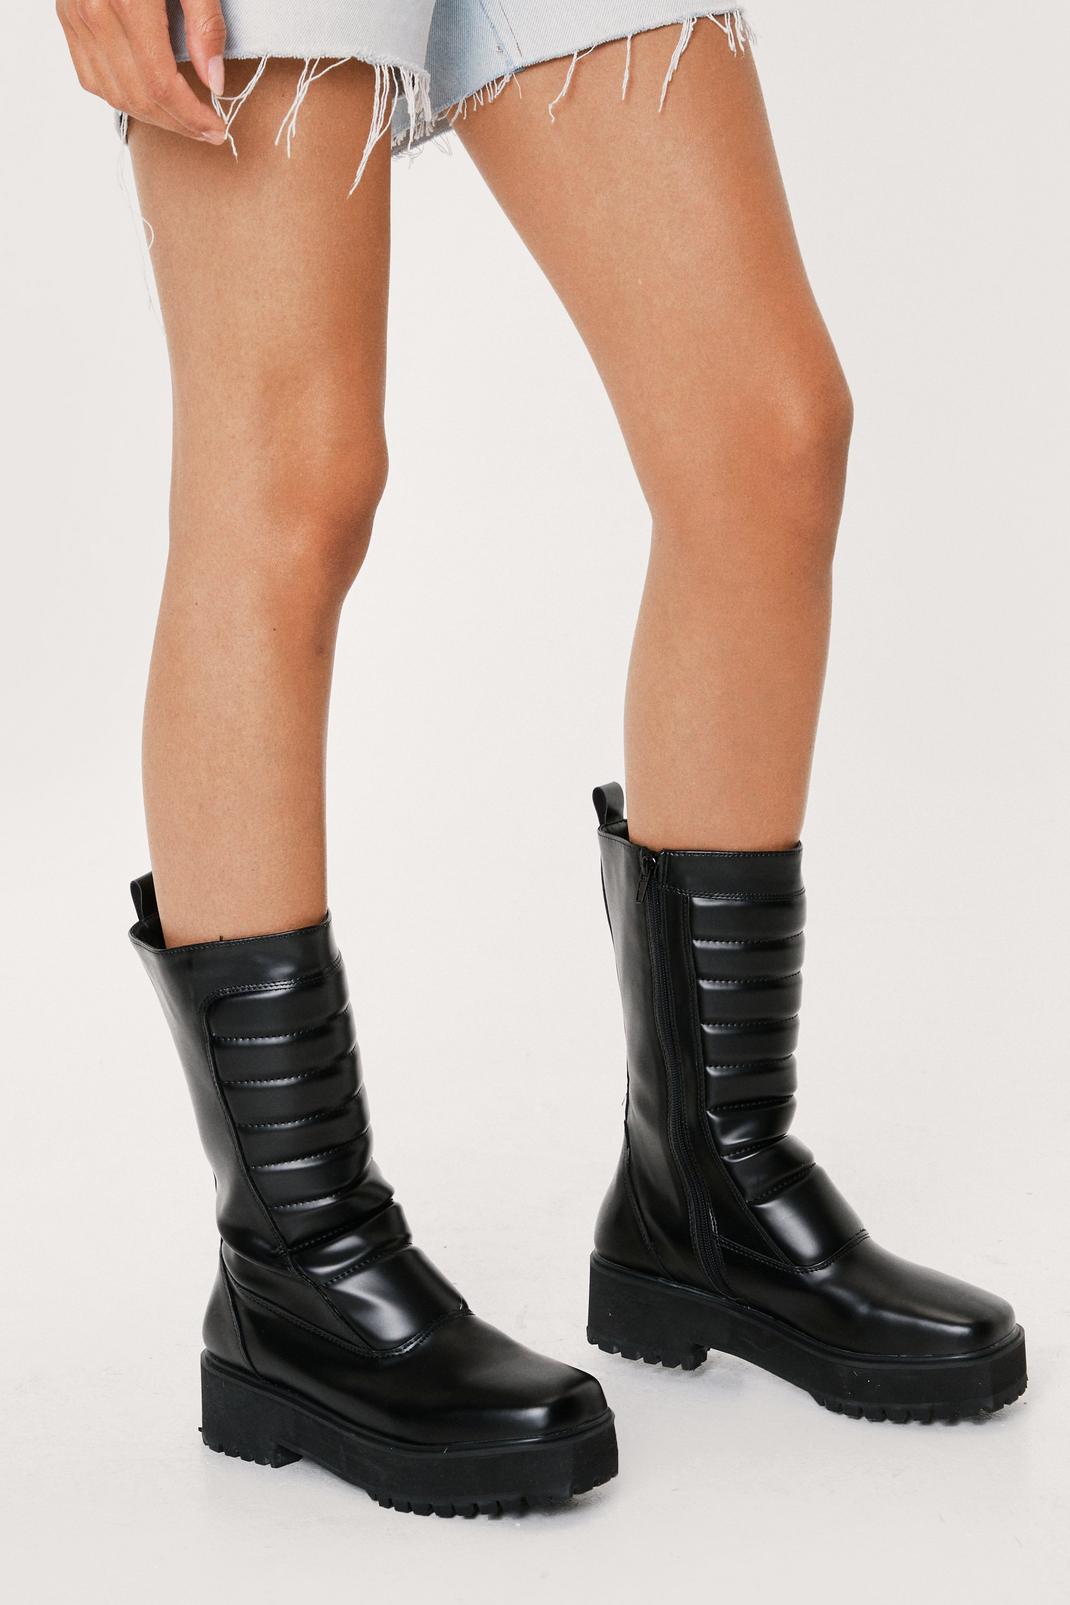 Black Faux Leather Padded Calf High Boots image number 1